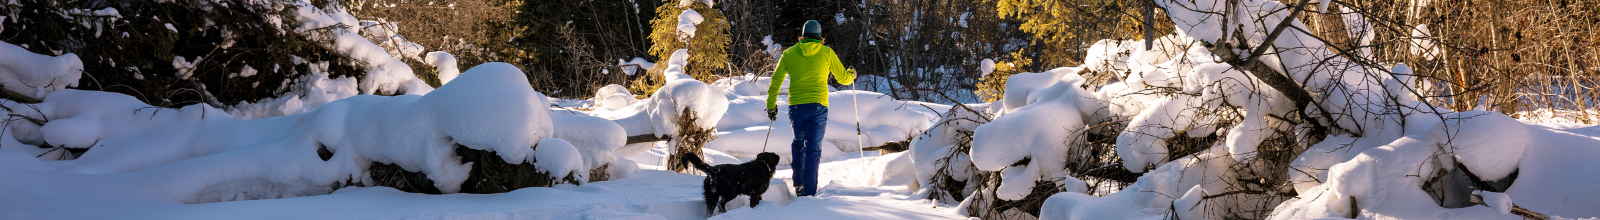 Cross country skiing with dog